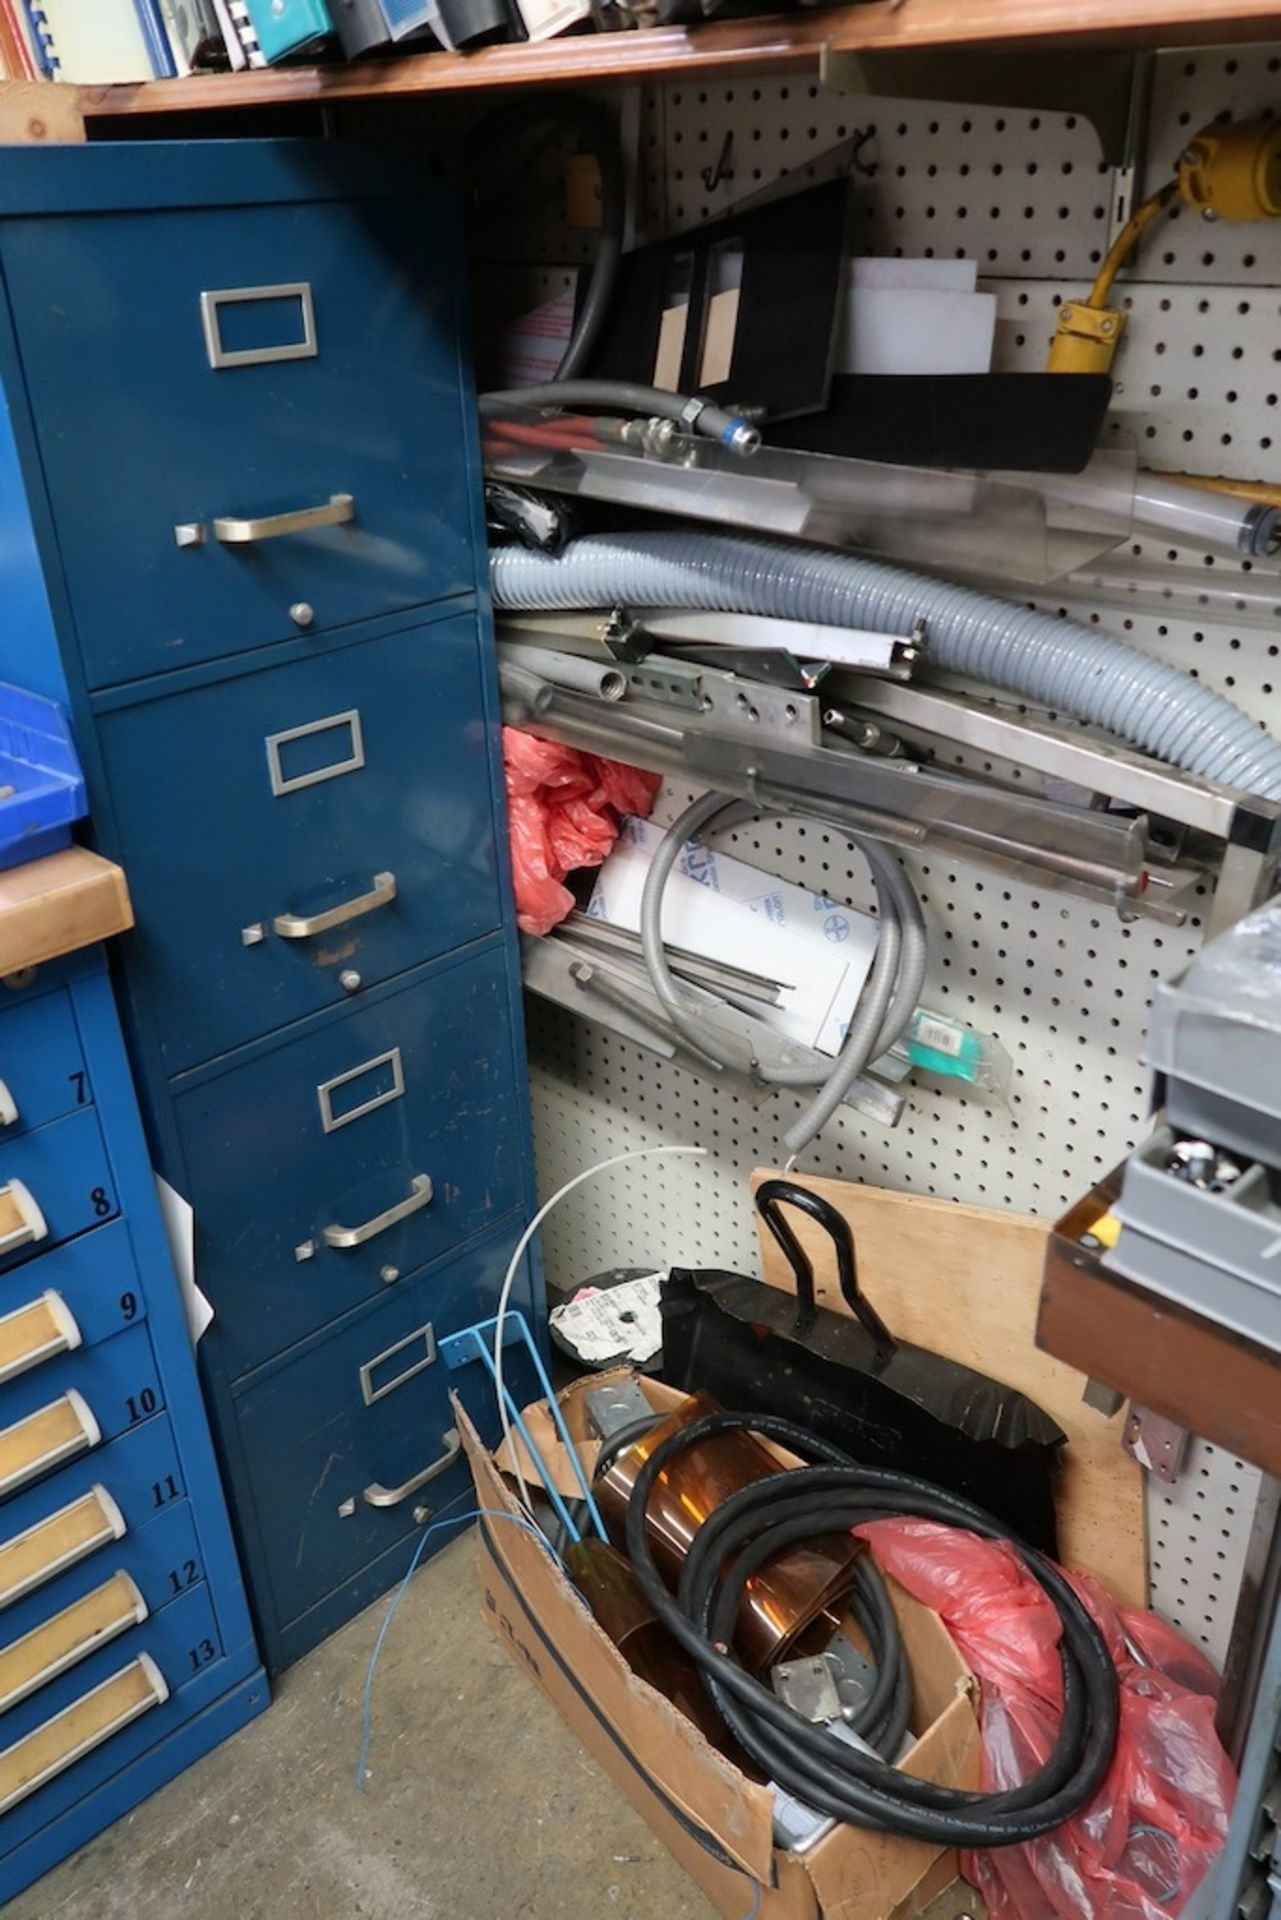 Remaining Contents of Tool Room Cage, Including Hardware Organizers, Etc. - Image 11 of 20